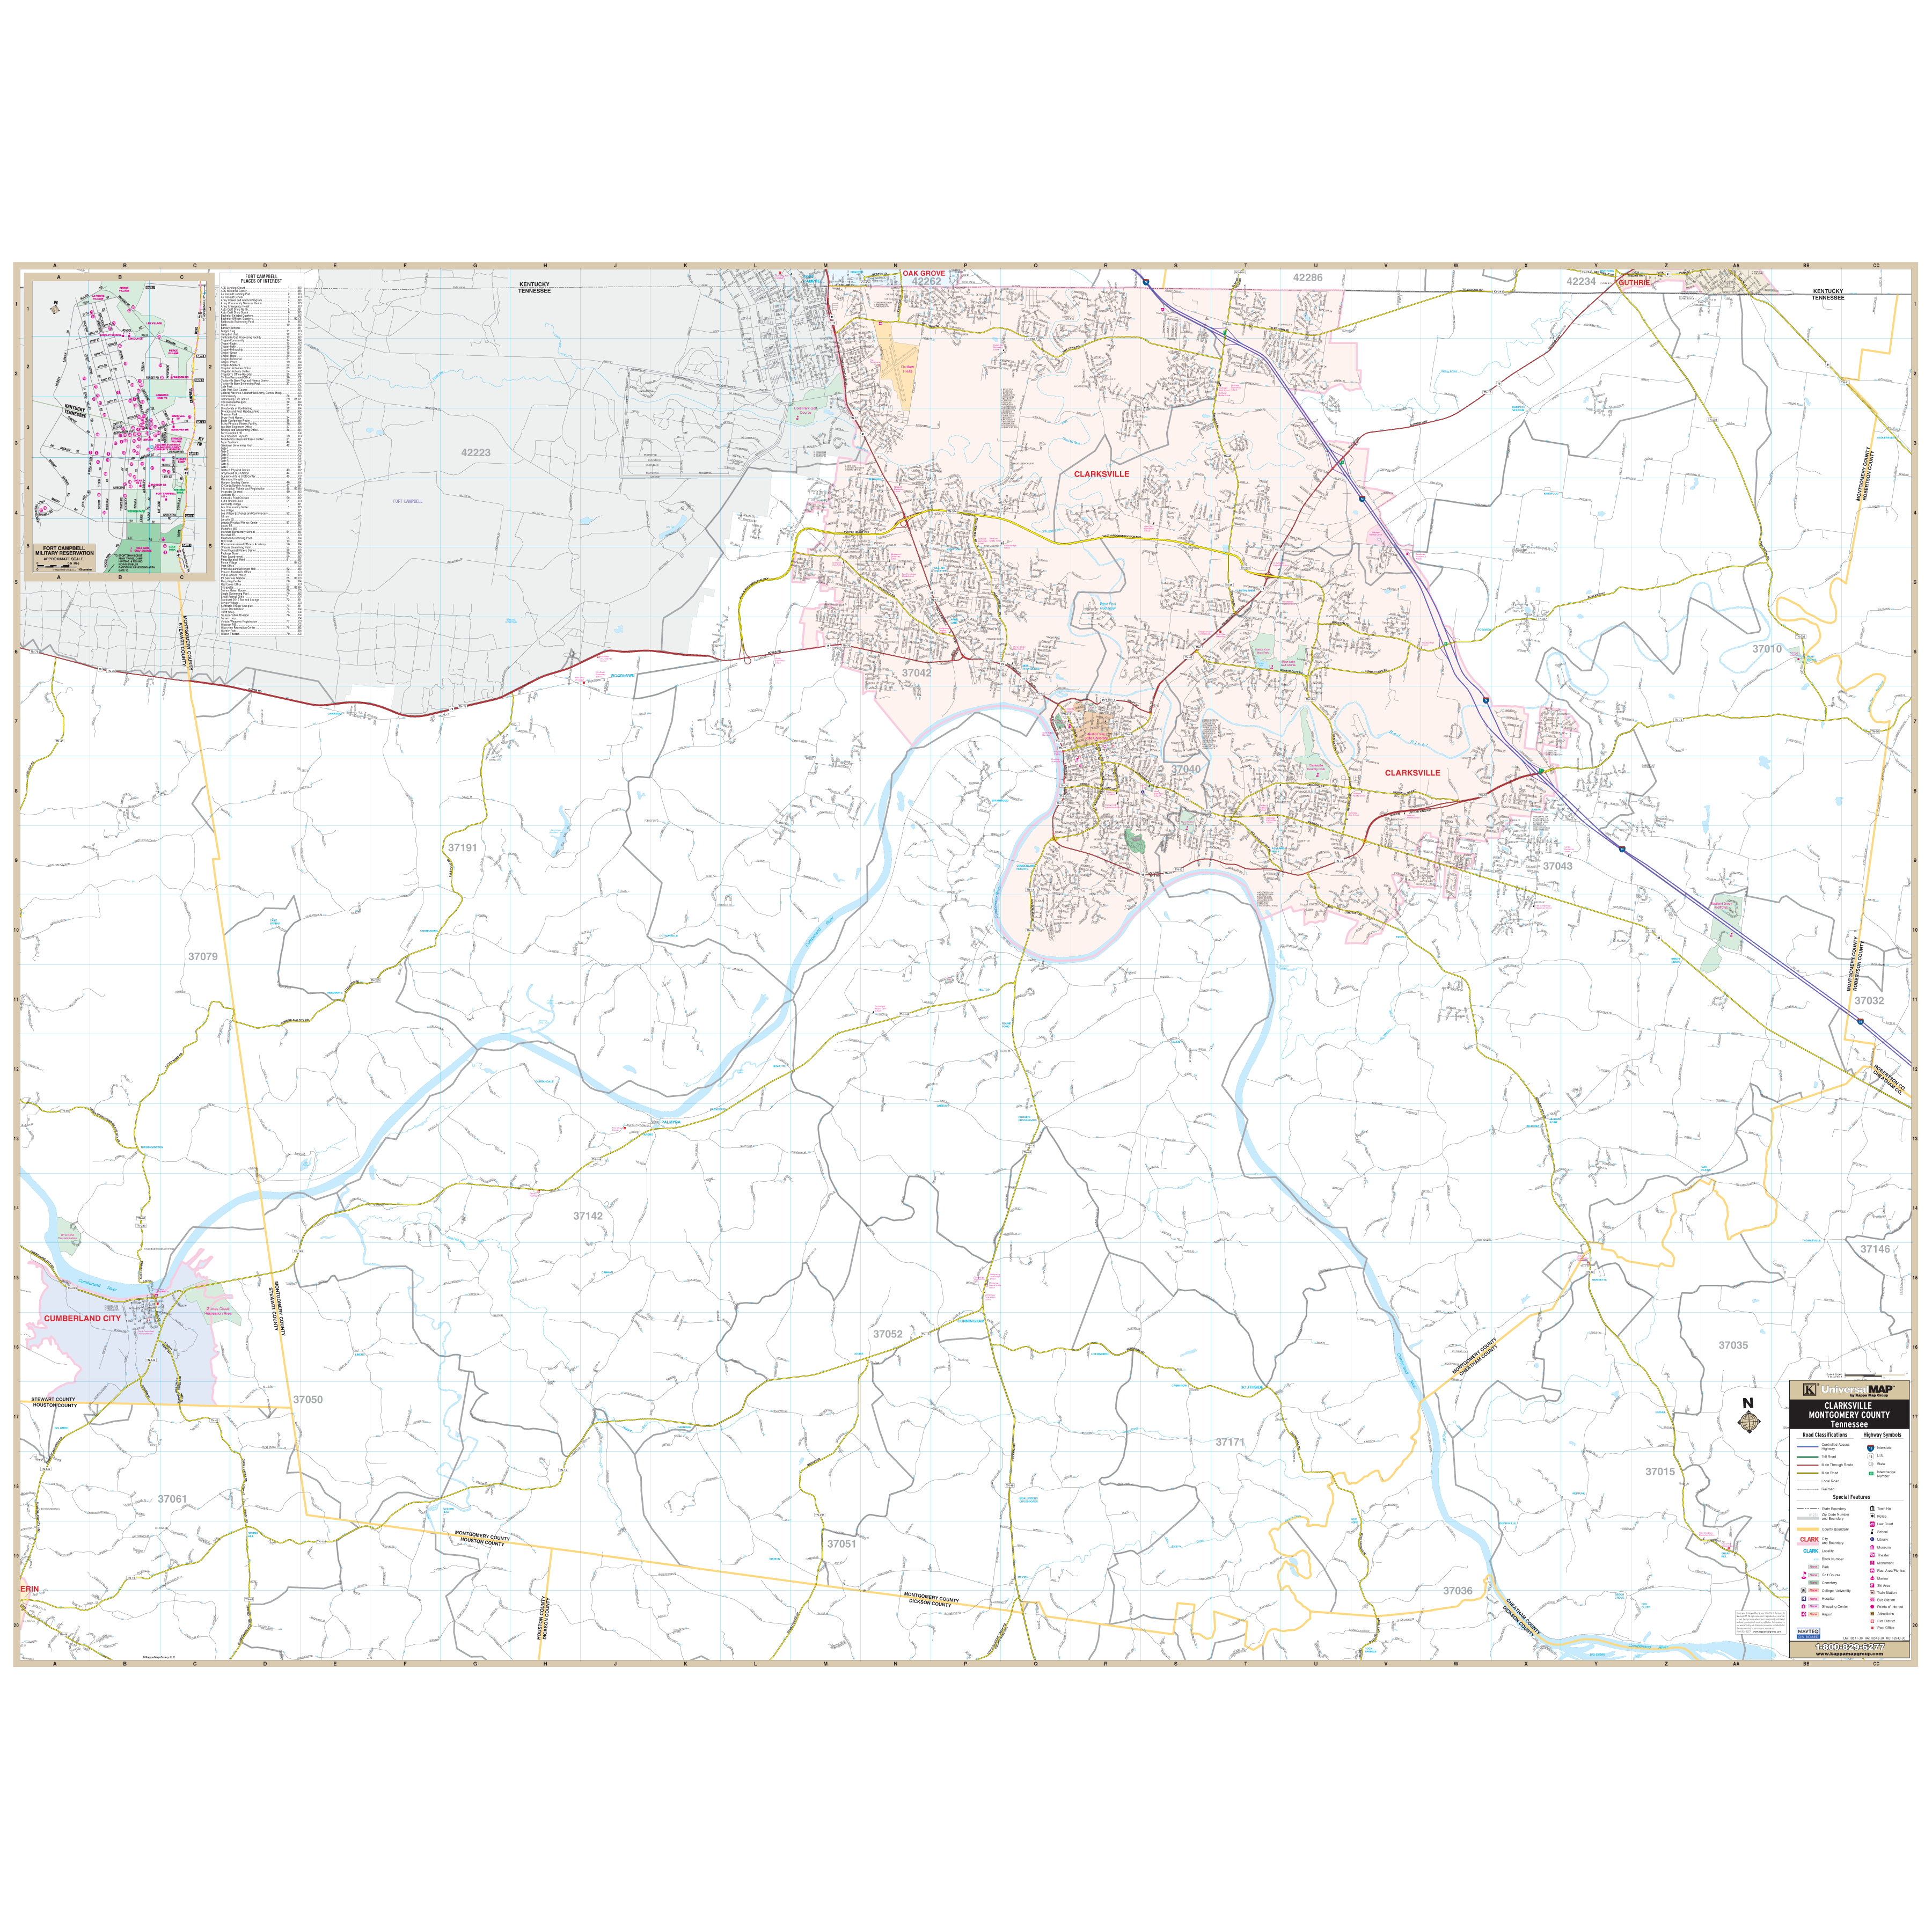 Clarksville Montgomery Co, Tn Wall Map - Large Laminated